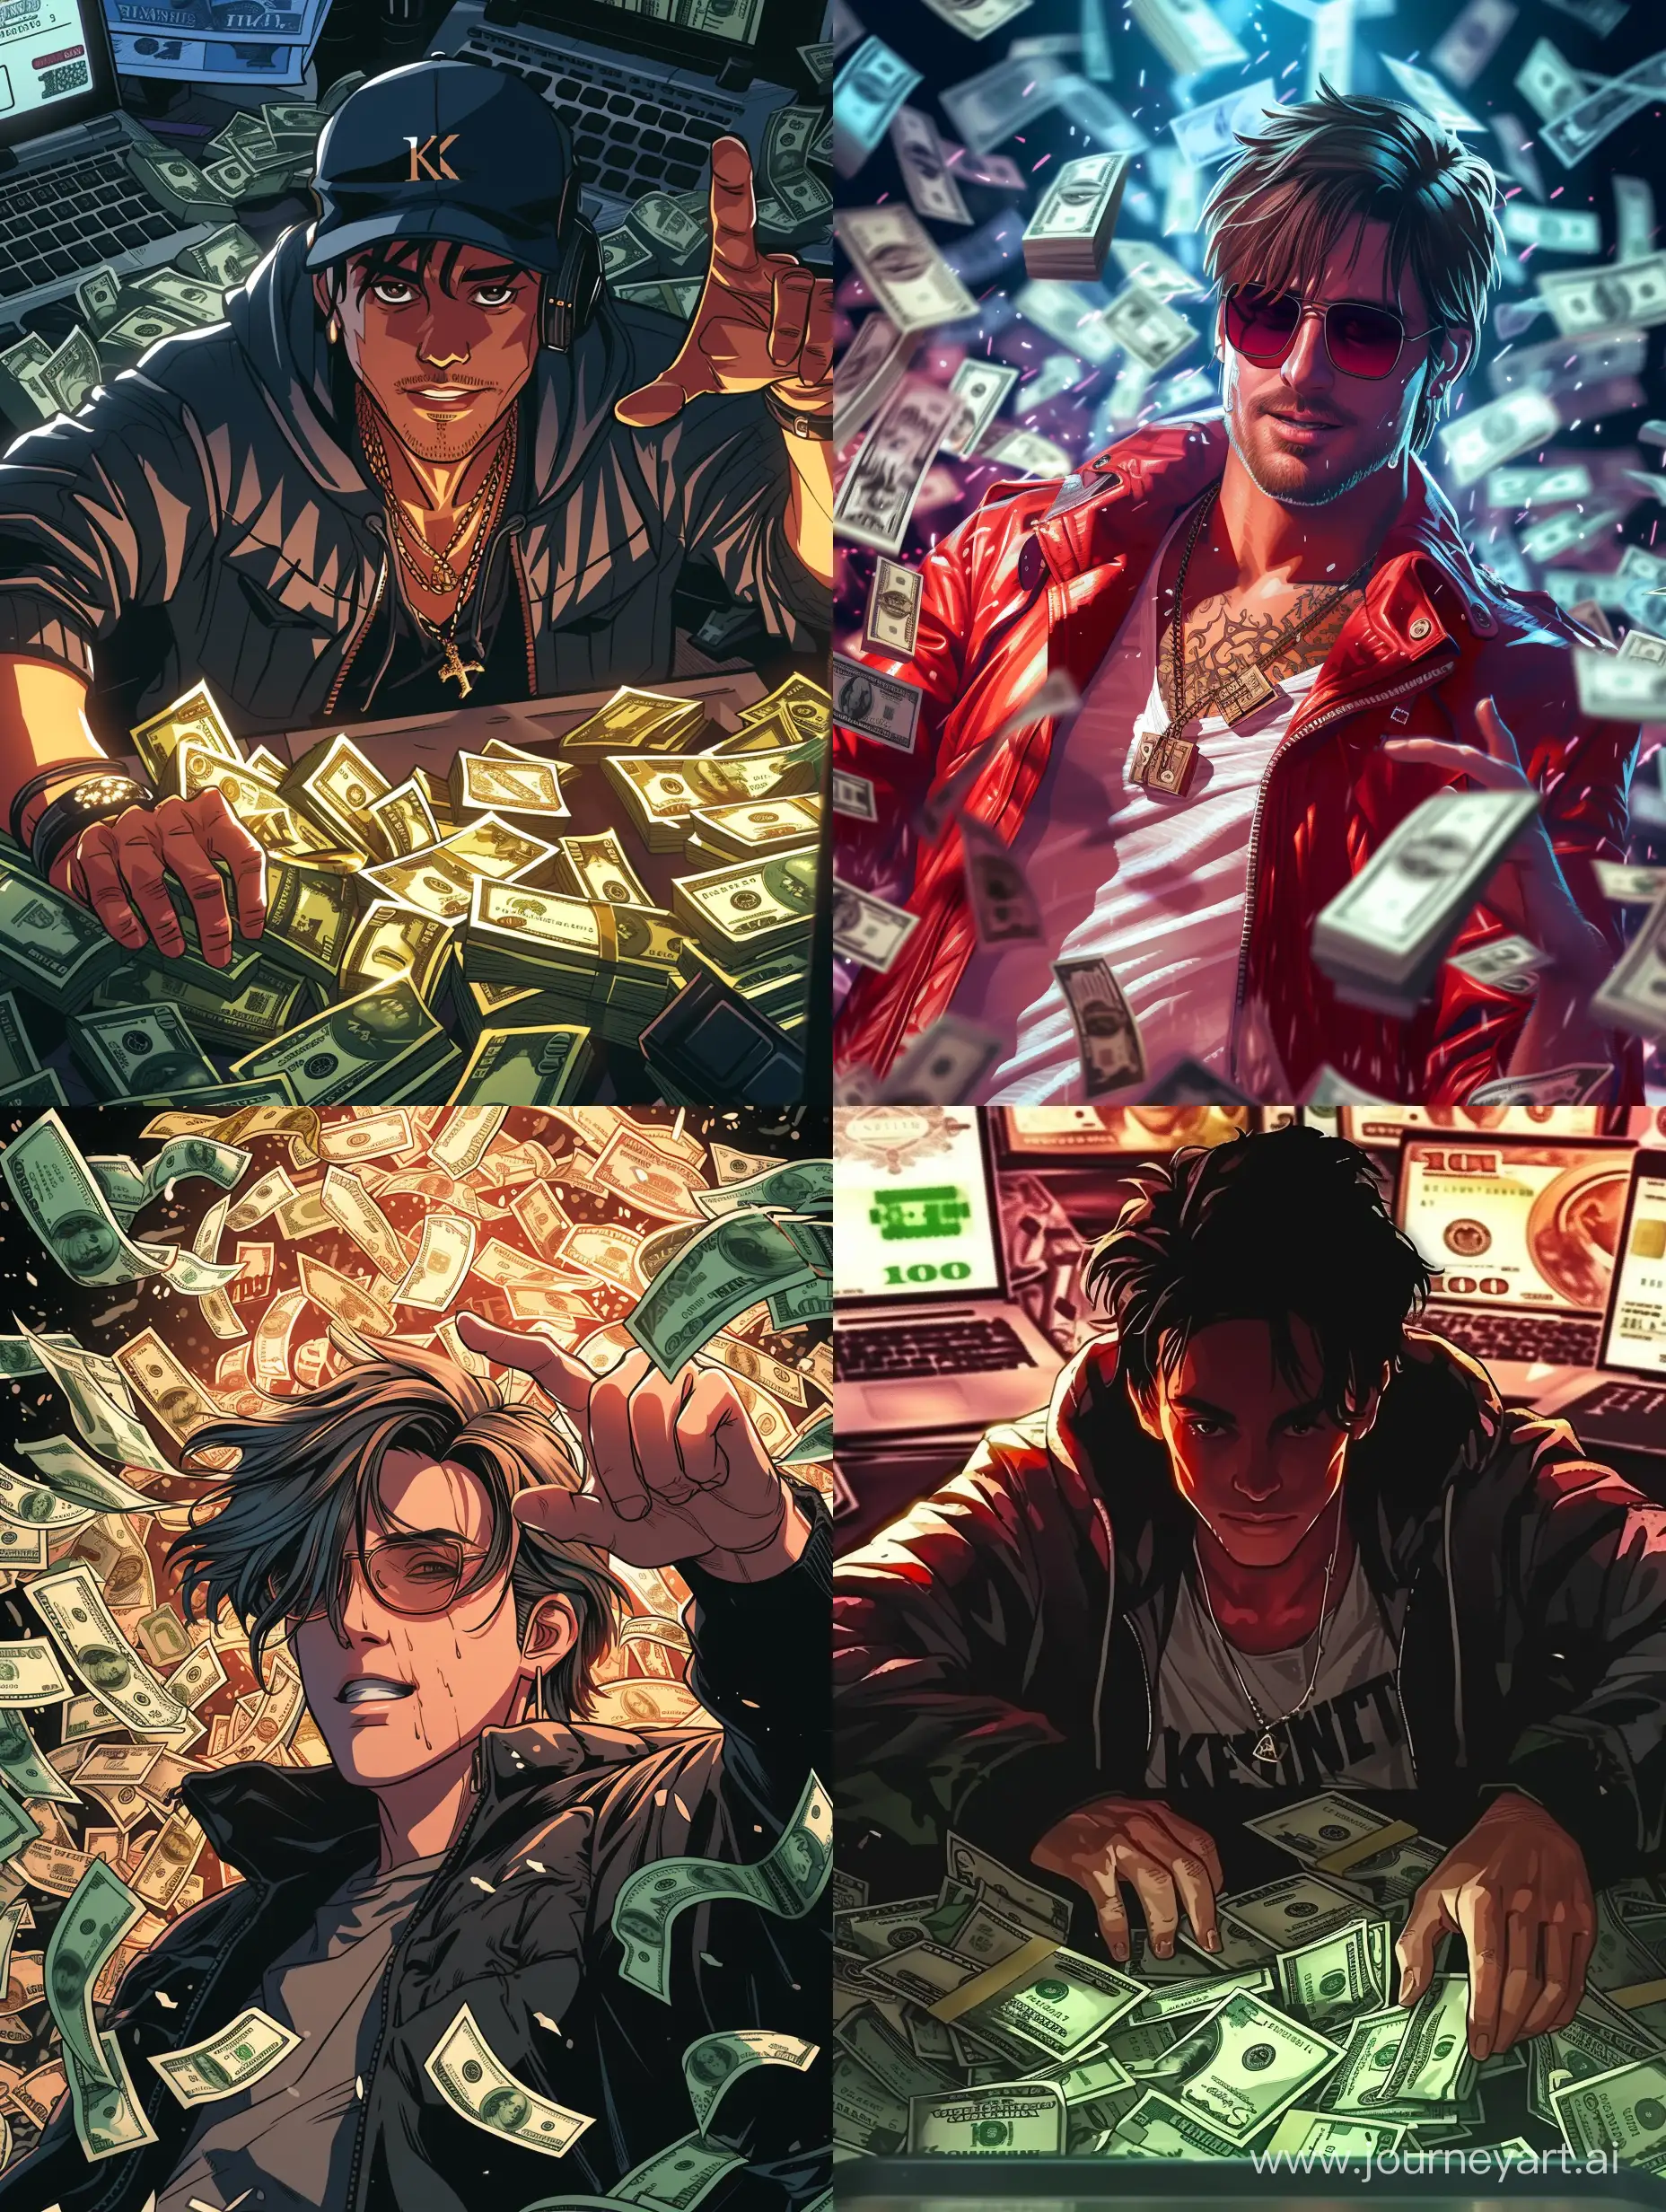 Image of a hacker character, lots of money, with the text ๖ۣۜKevin in the background